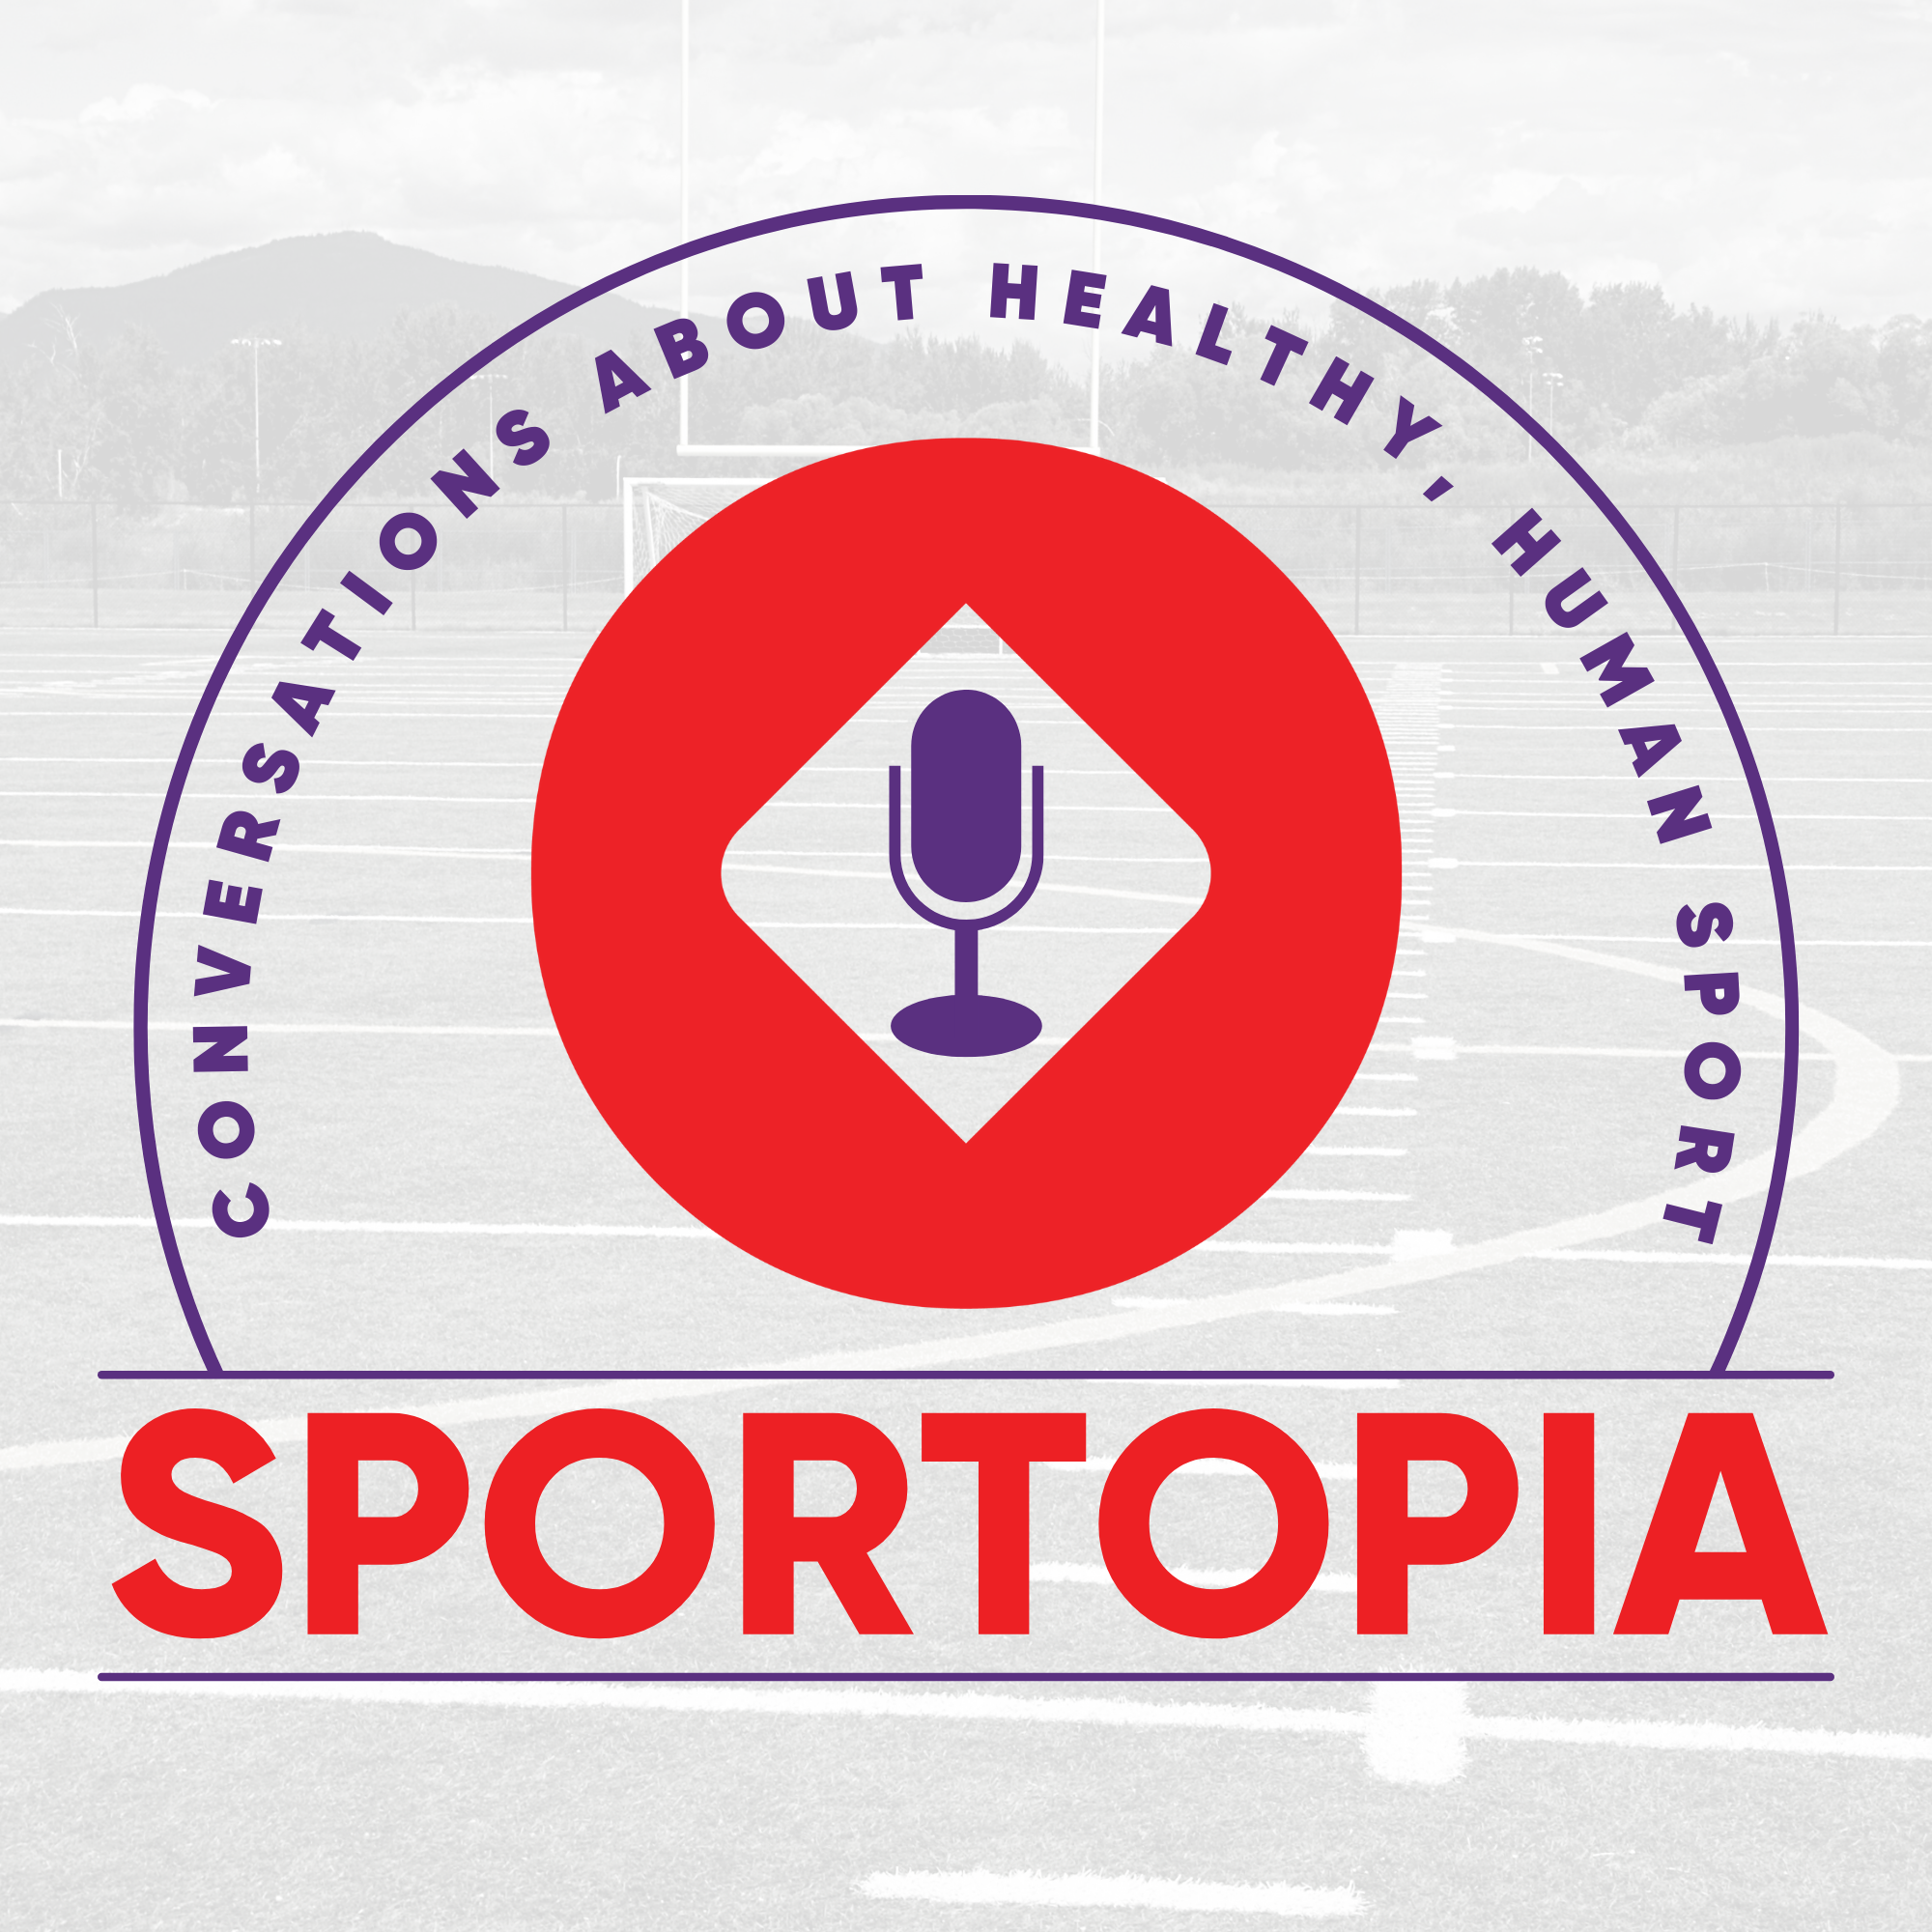 Episode 10 - Finding the right Directors for your sport organization